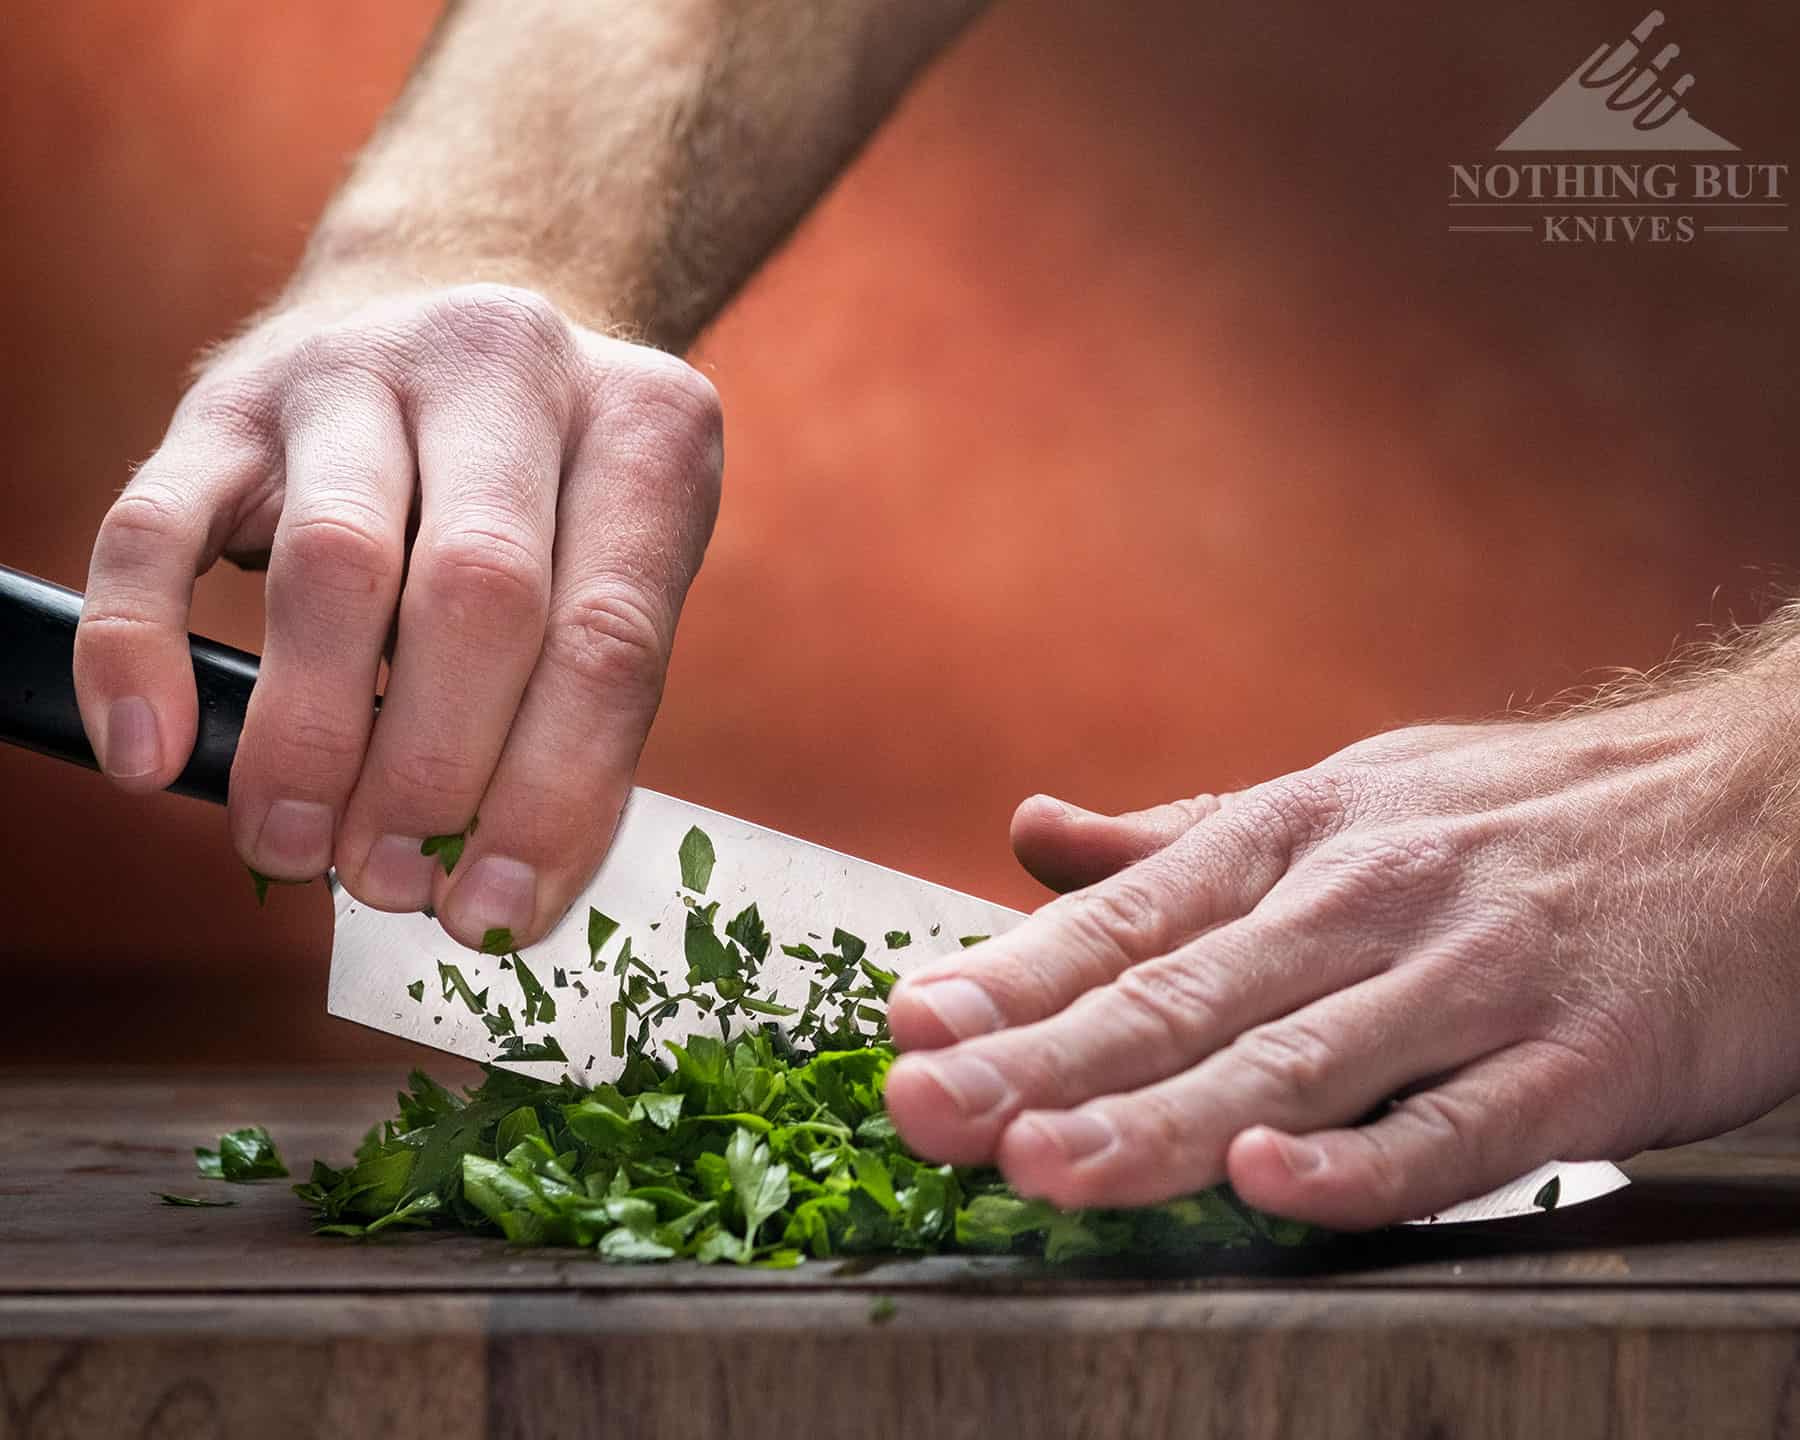 https://www.nothingbutknives.com/wp-content/uploads/2023/01/Dicing-Herbs-with-the-Artisan-Chef-Knife.jpg